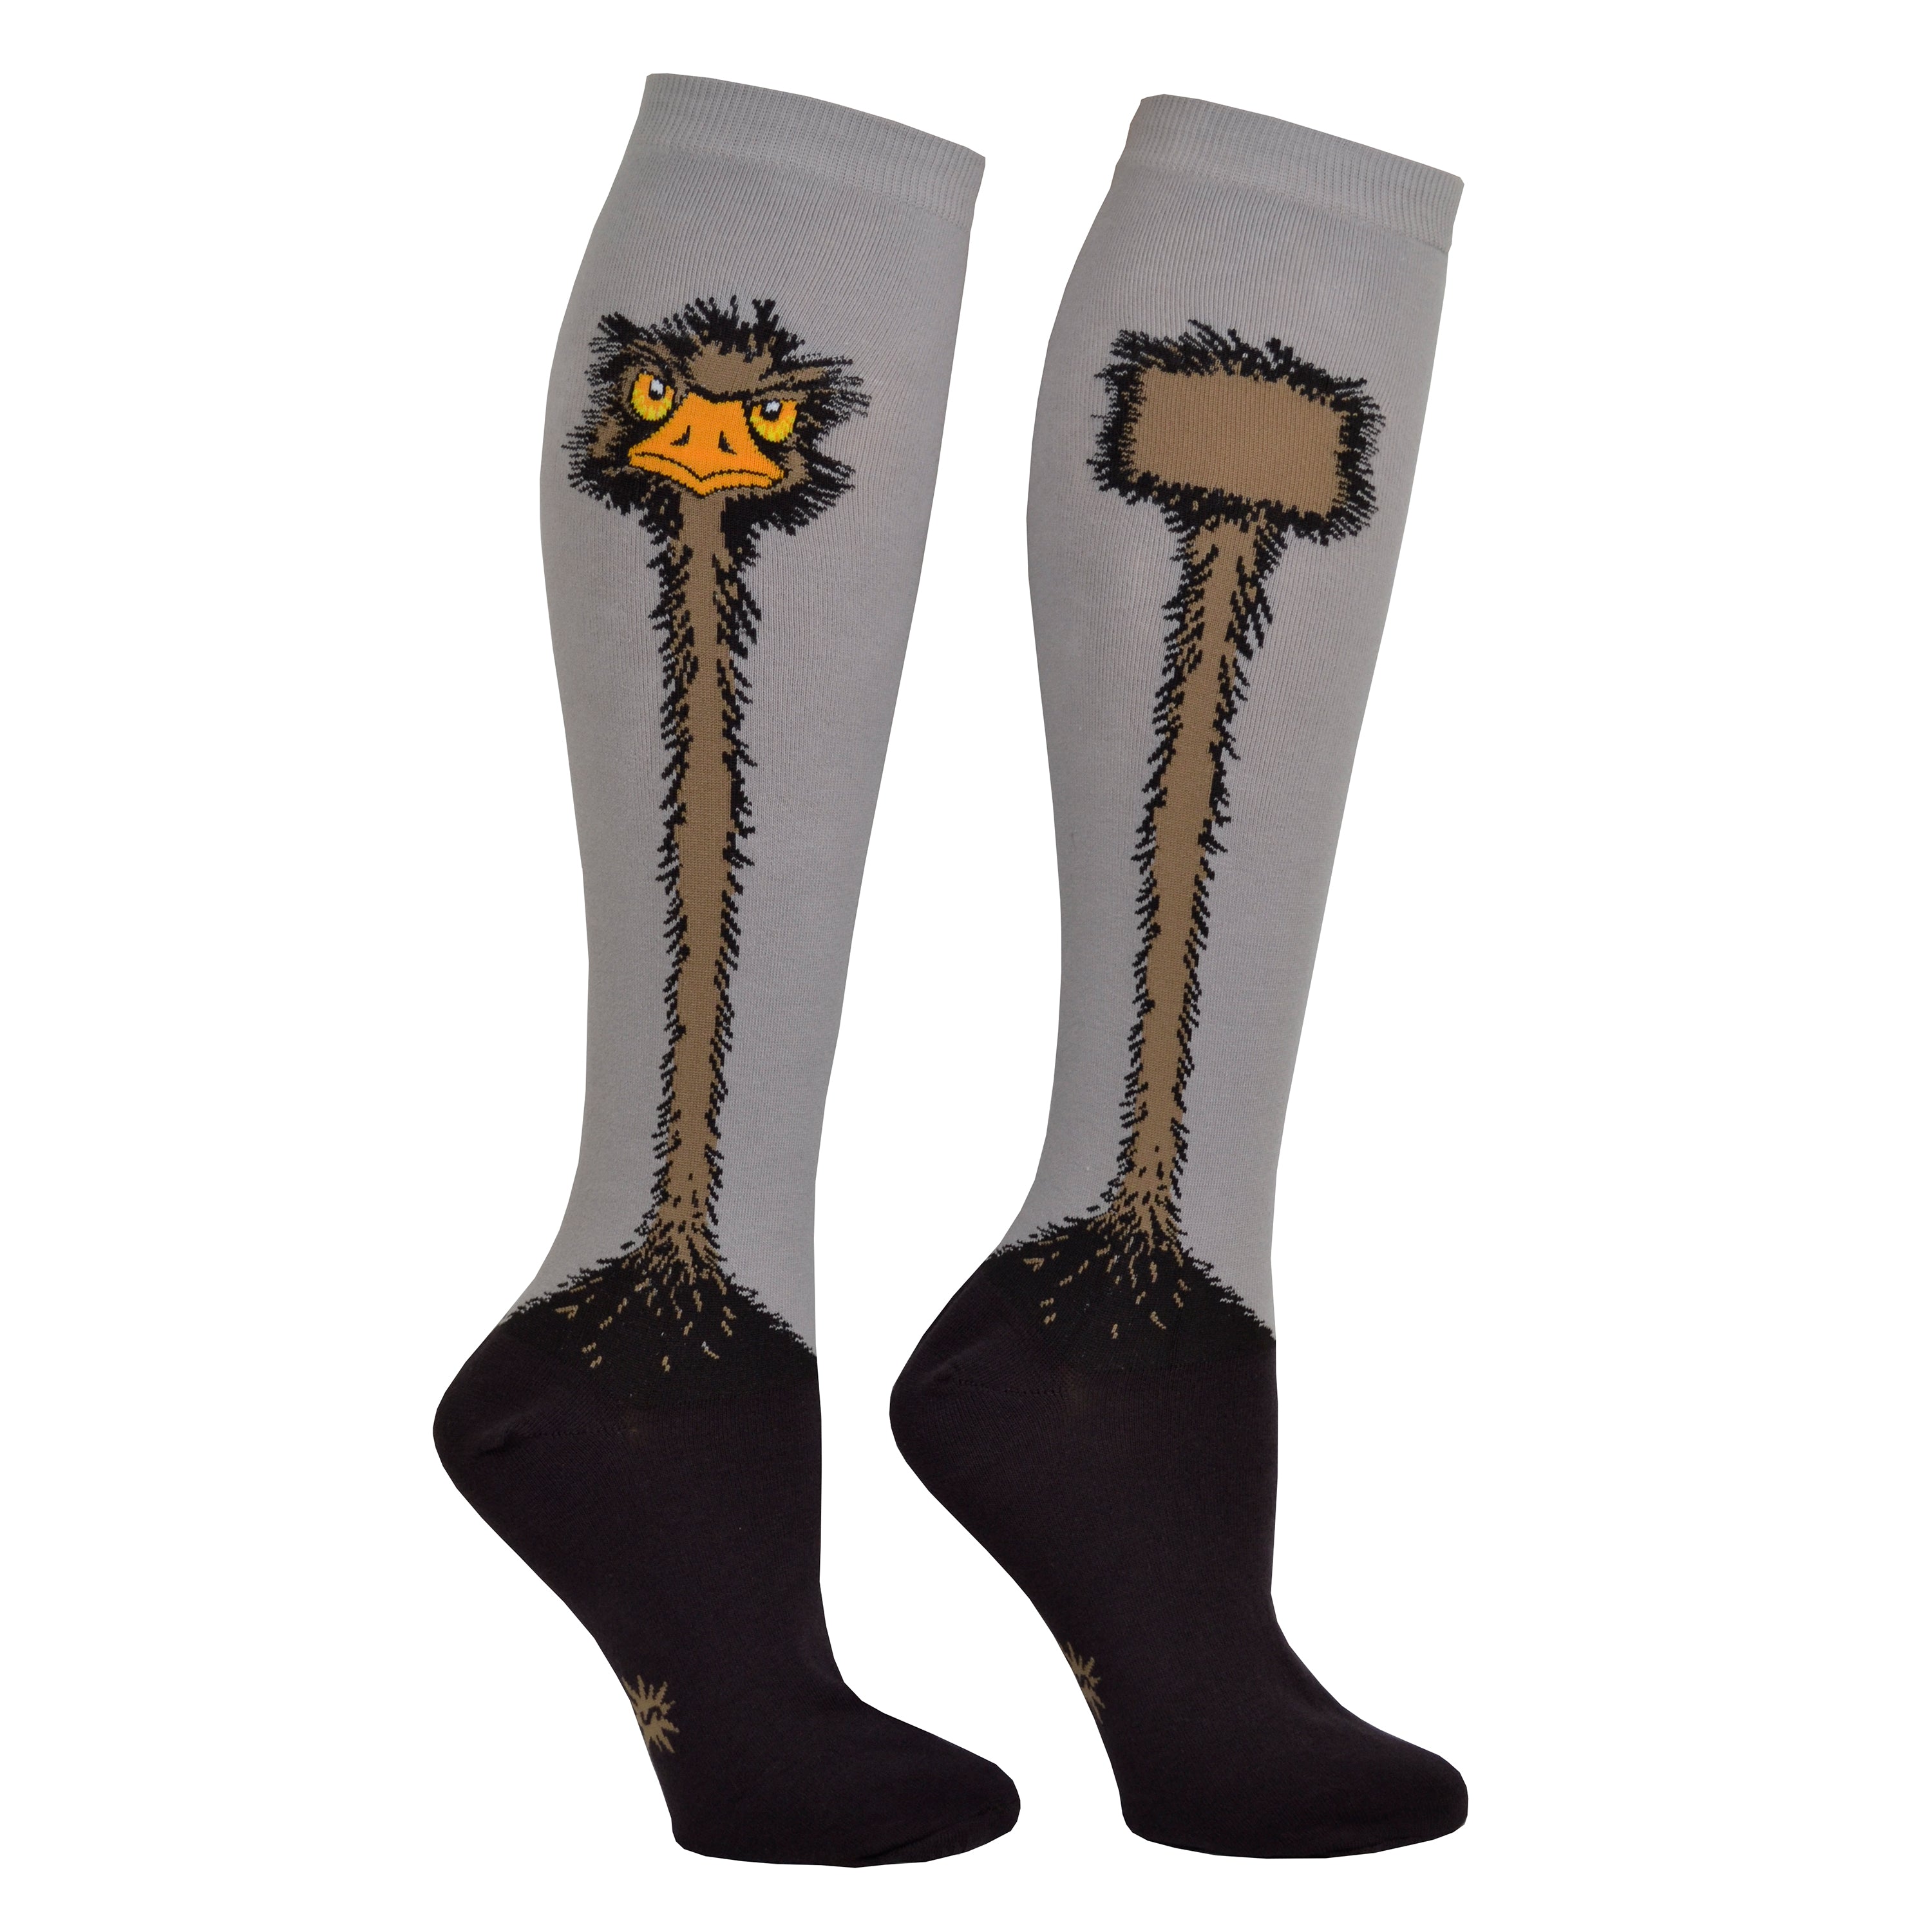 Shown on two leg forms, a pair of Sock It To Me brand Stretch It cotton knee high socks in grey and black. The leg of the sock is grey with a cartoon ostrich design going down the leg and transitioning into the black foot